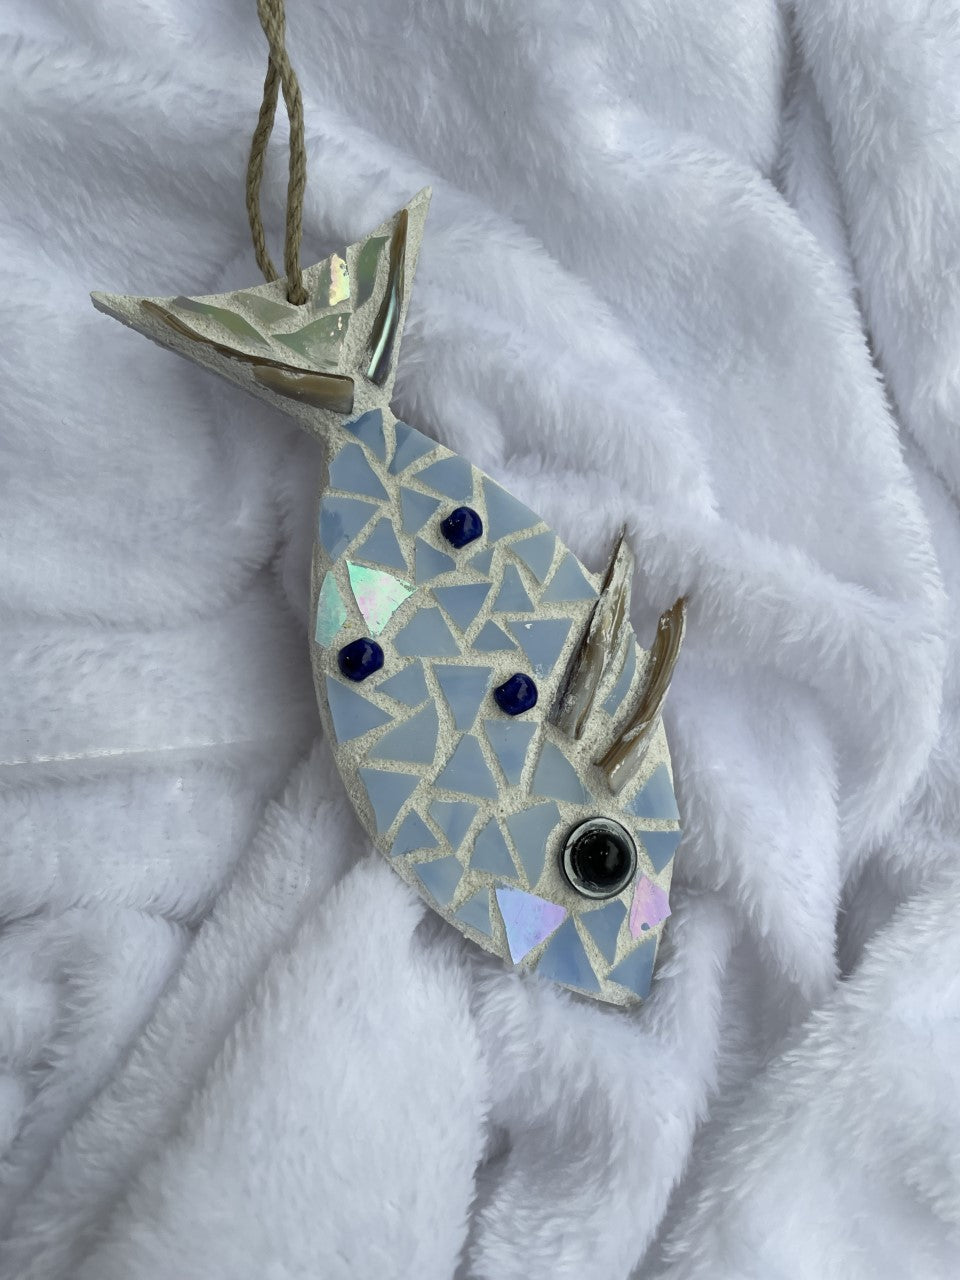 Soft blue and iridescent stained glass mosaic fish ornament